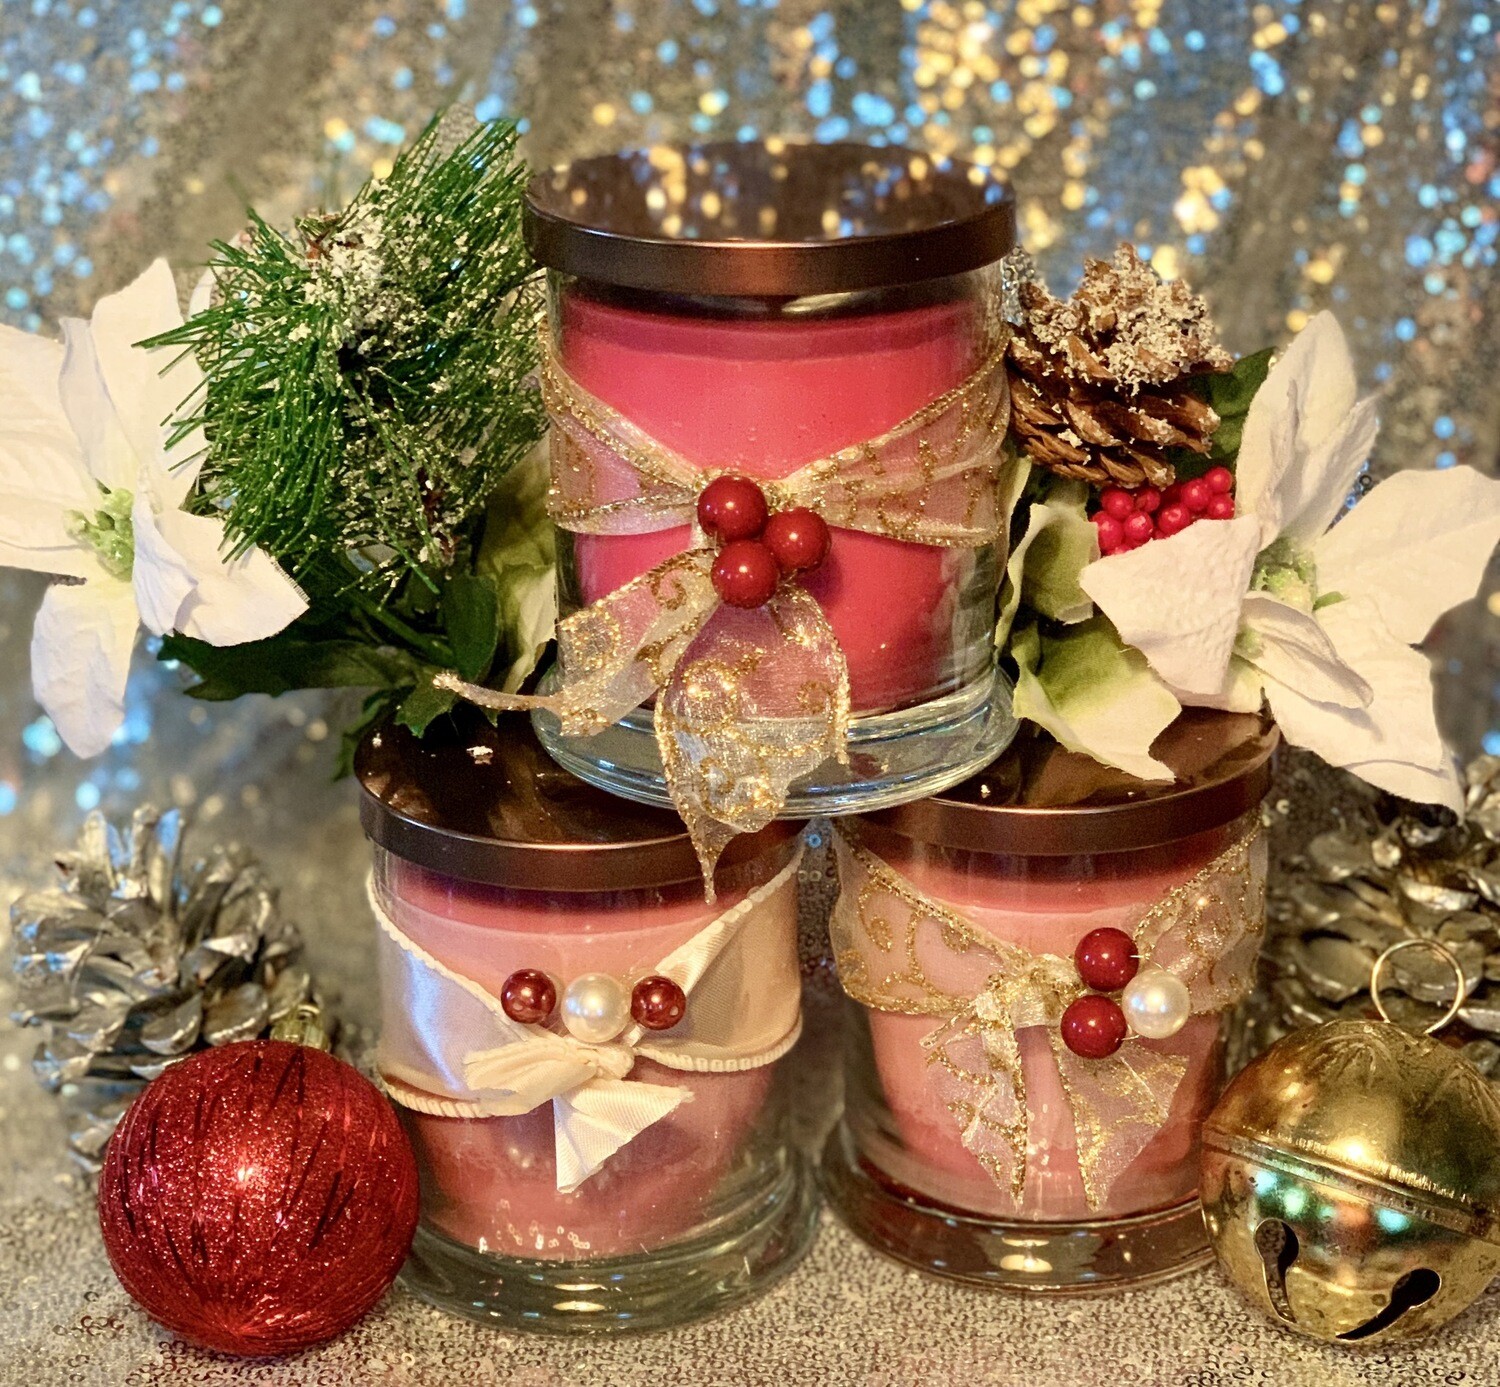 Candle Club Of The Month (Payment Every 3 Months Cancel Anytime)